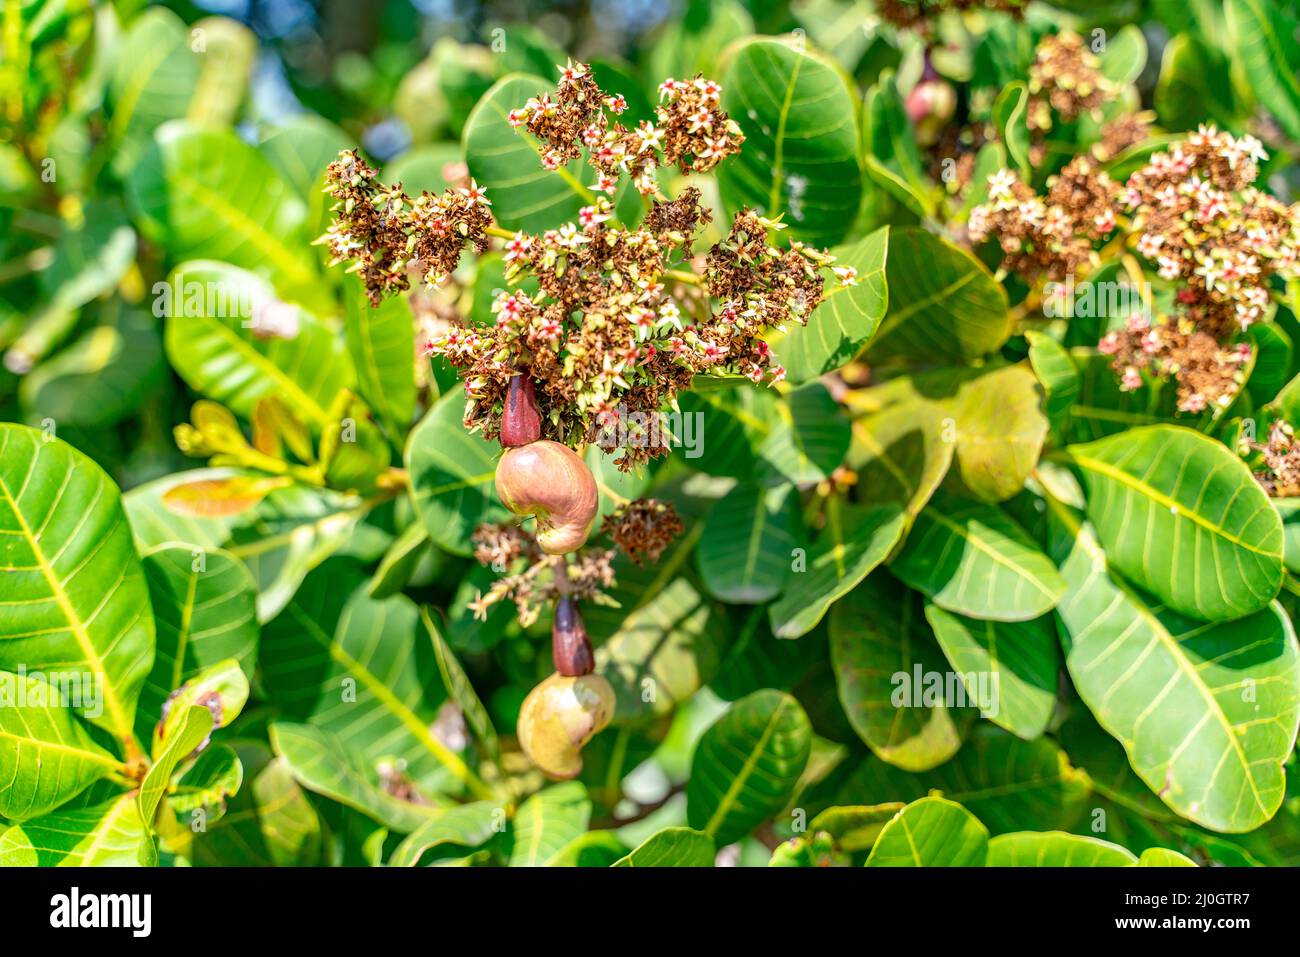 The view of cashew tree Stock Photo